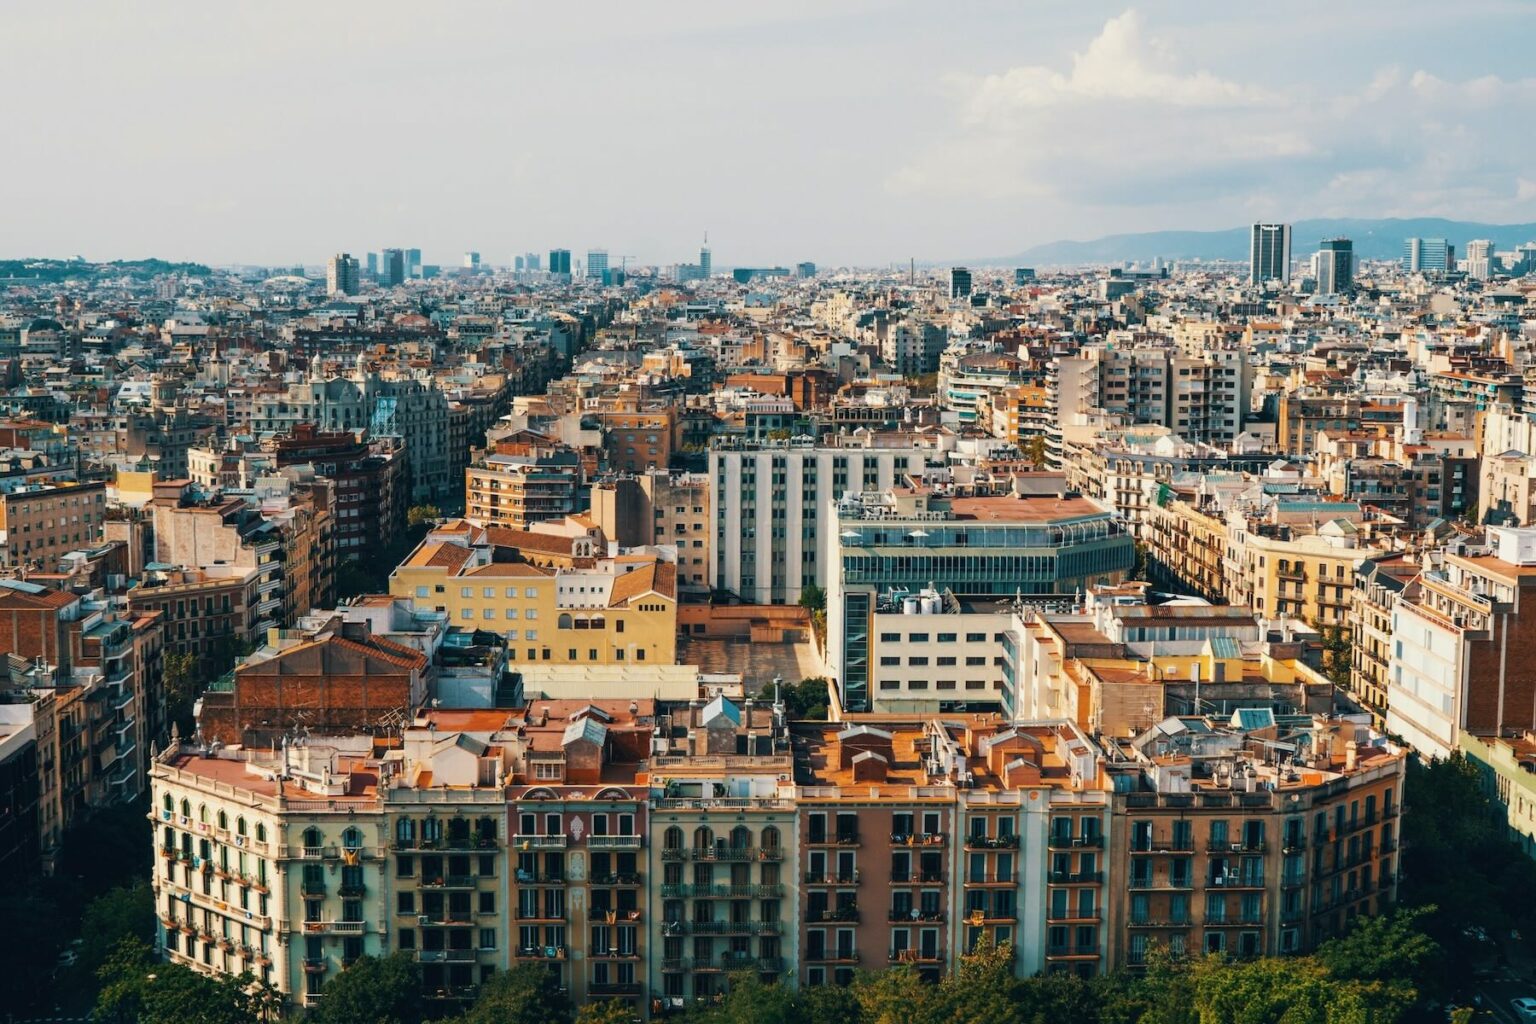 A city view of Barcelona with building rooftops shown from the sky